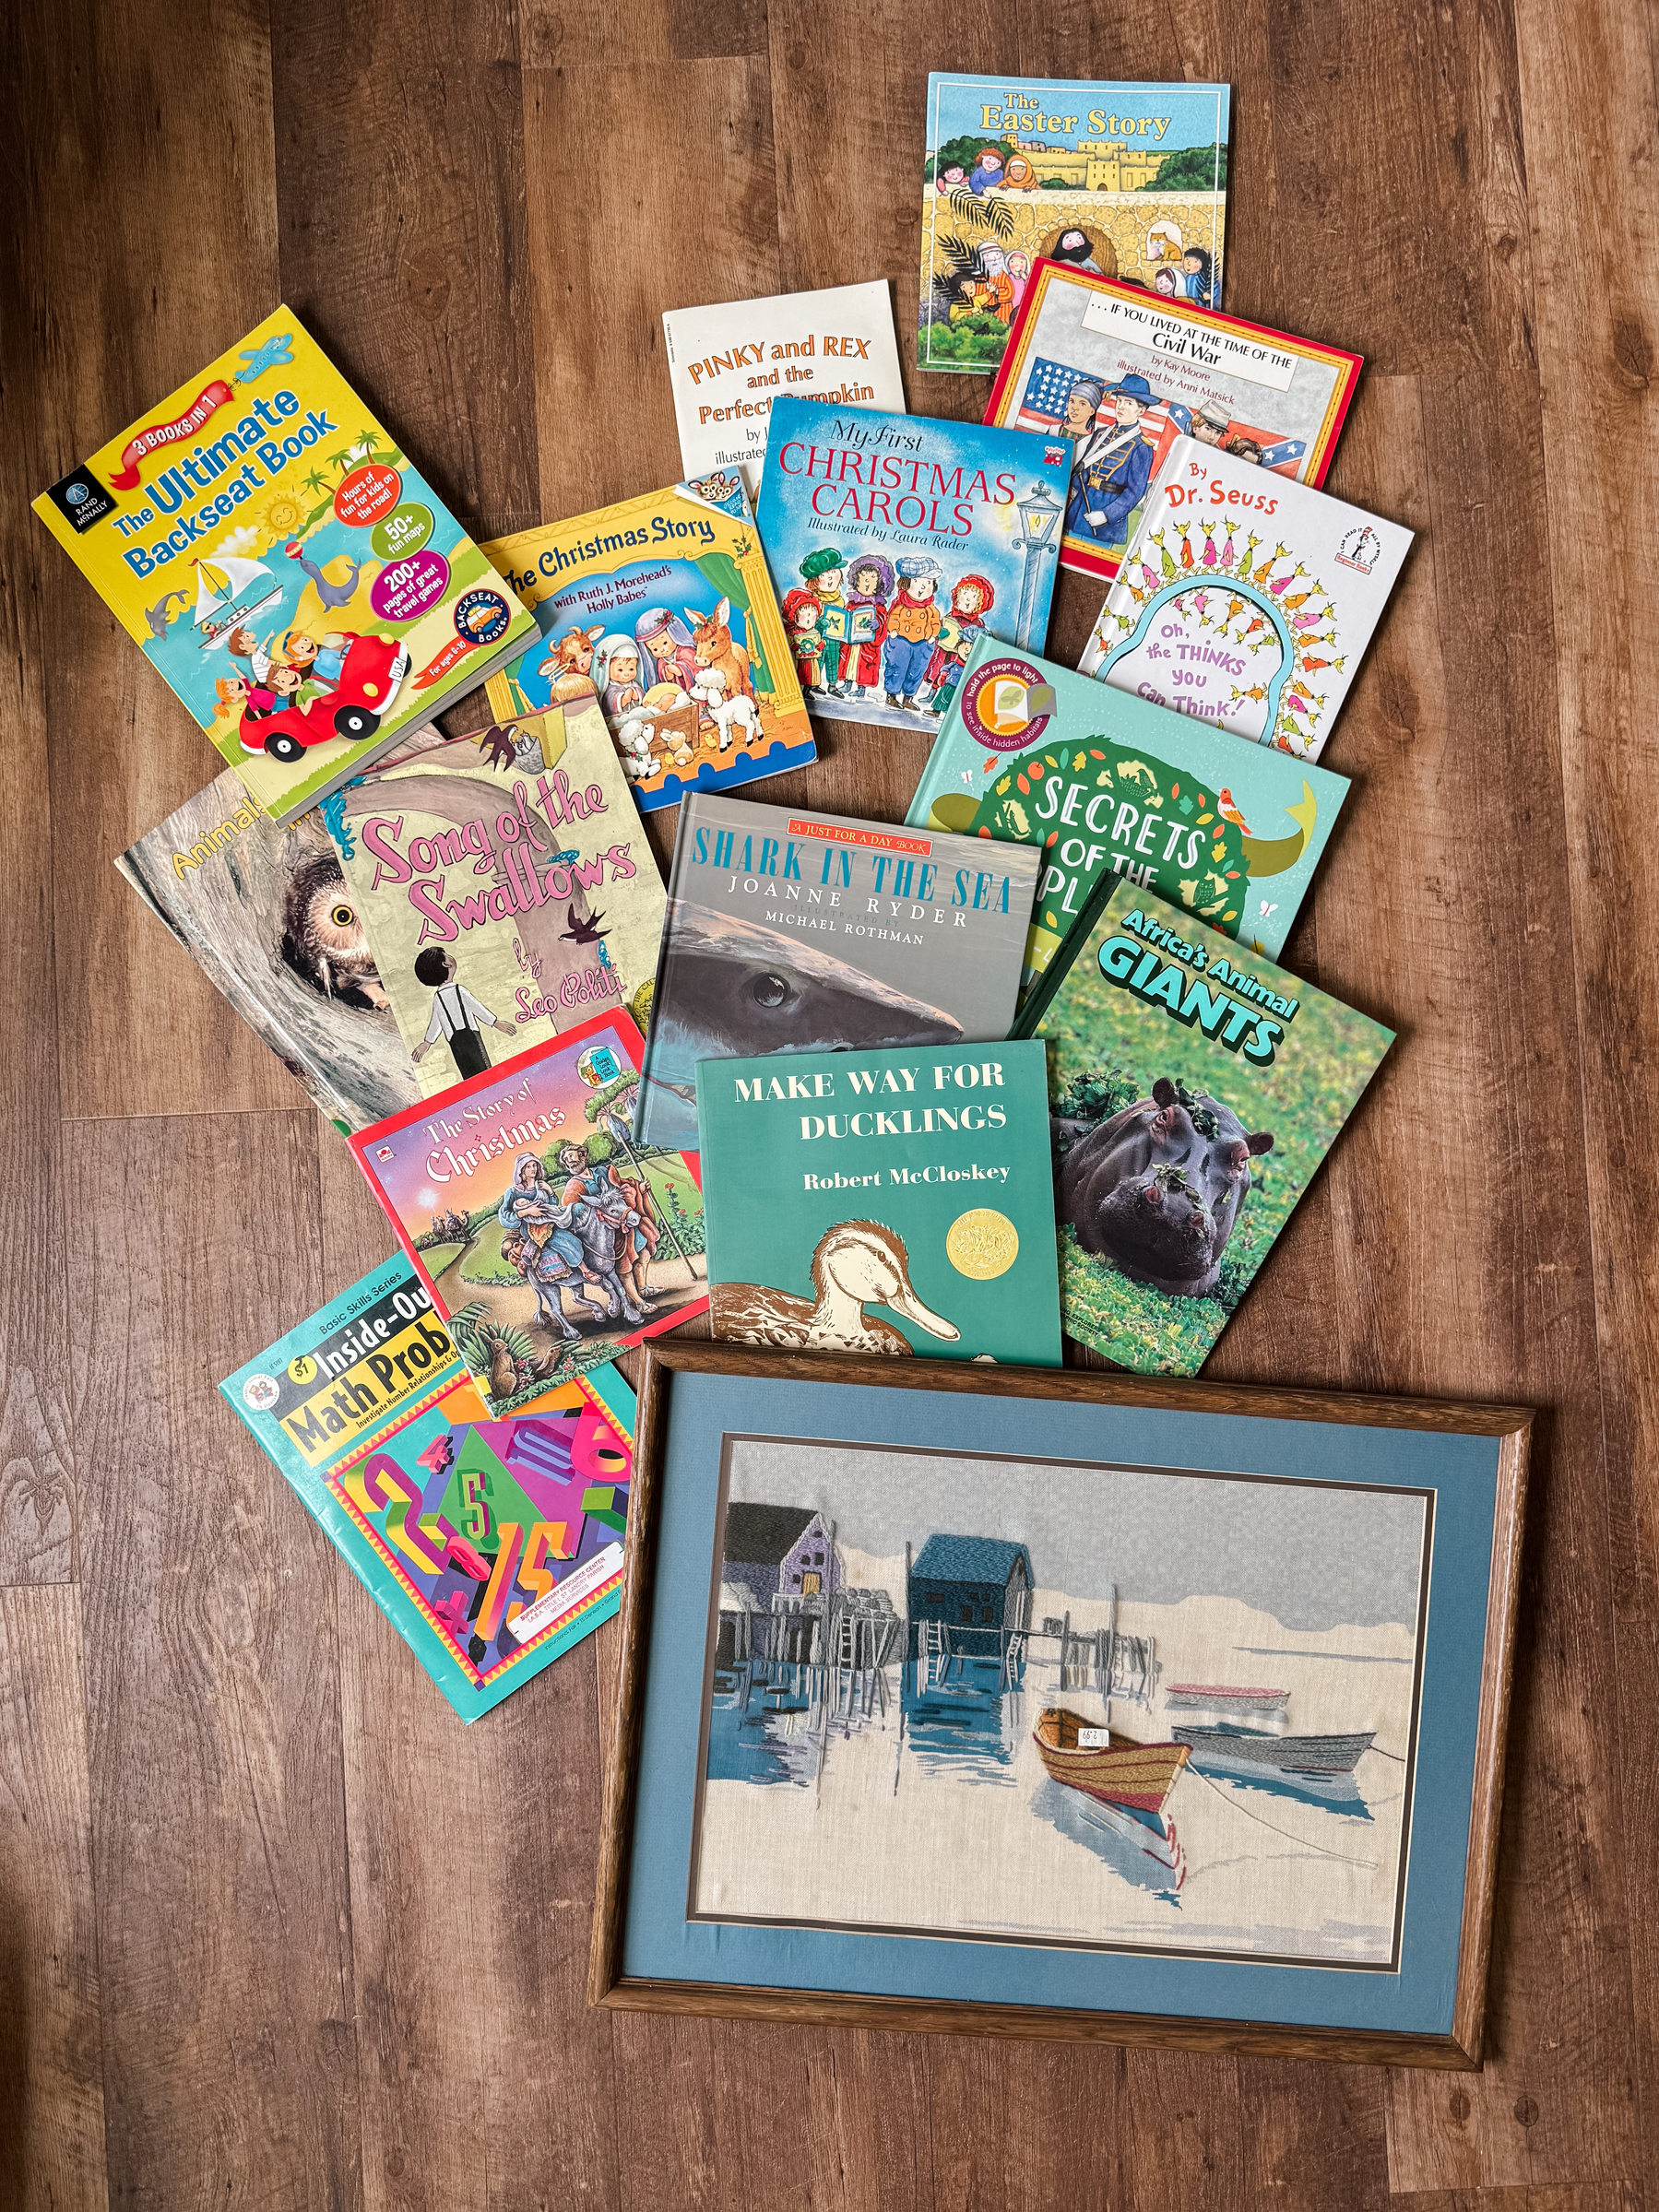 A photo of 15 children’s books and a framed embroidered portrait of some canoes along a pier